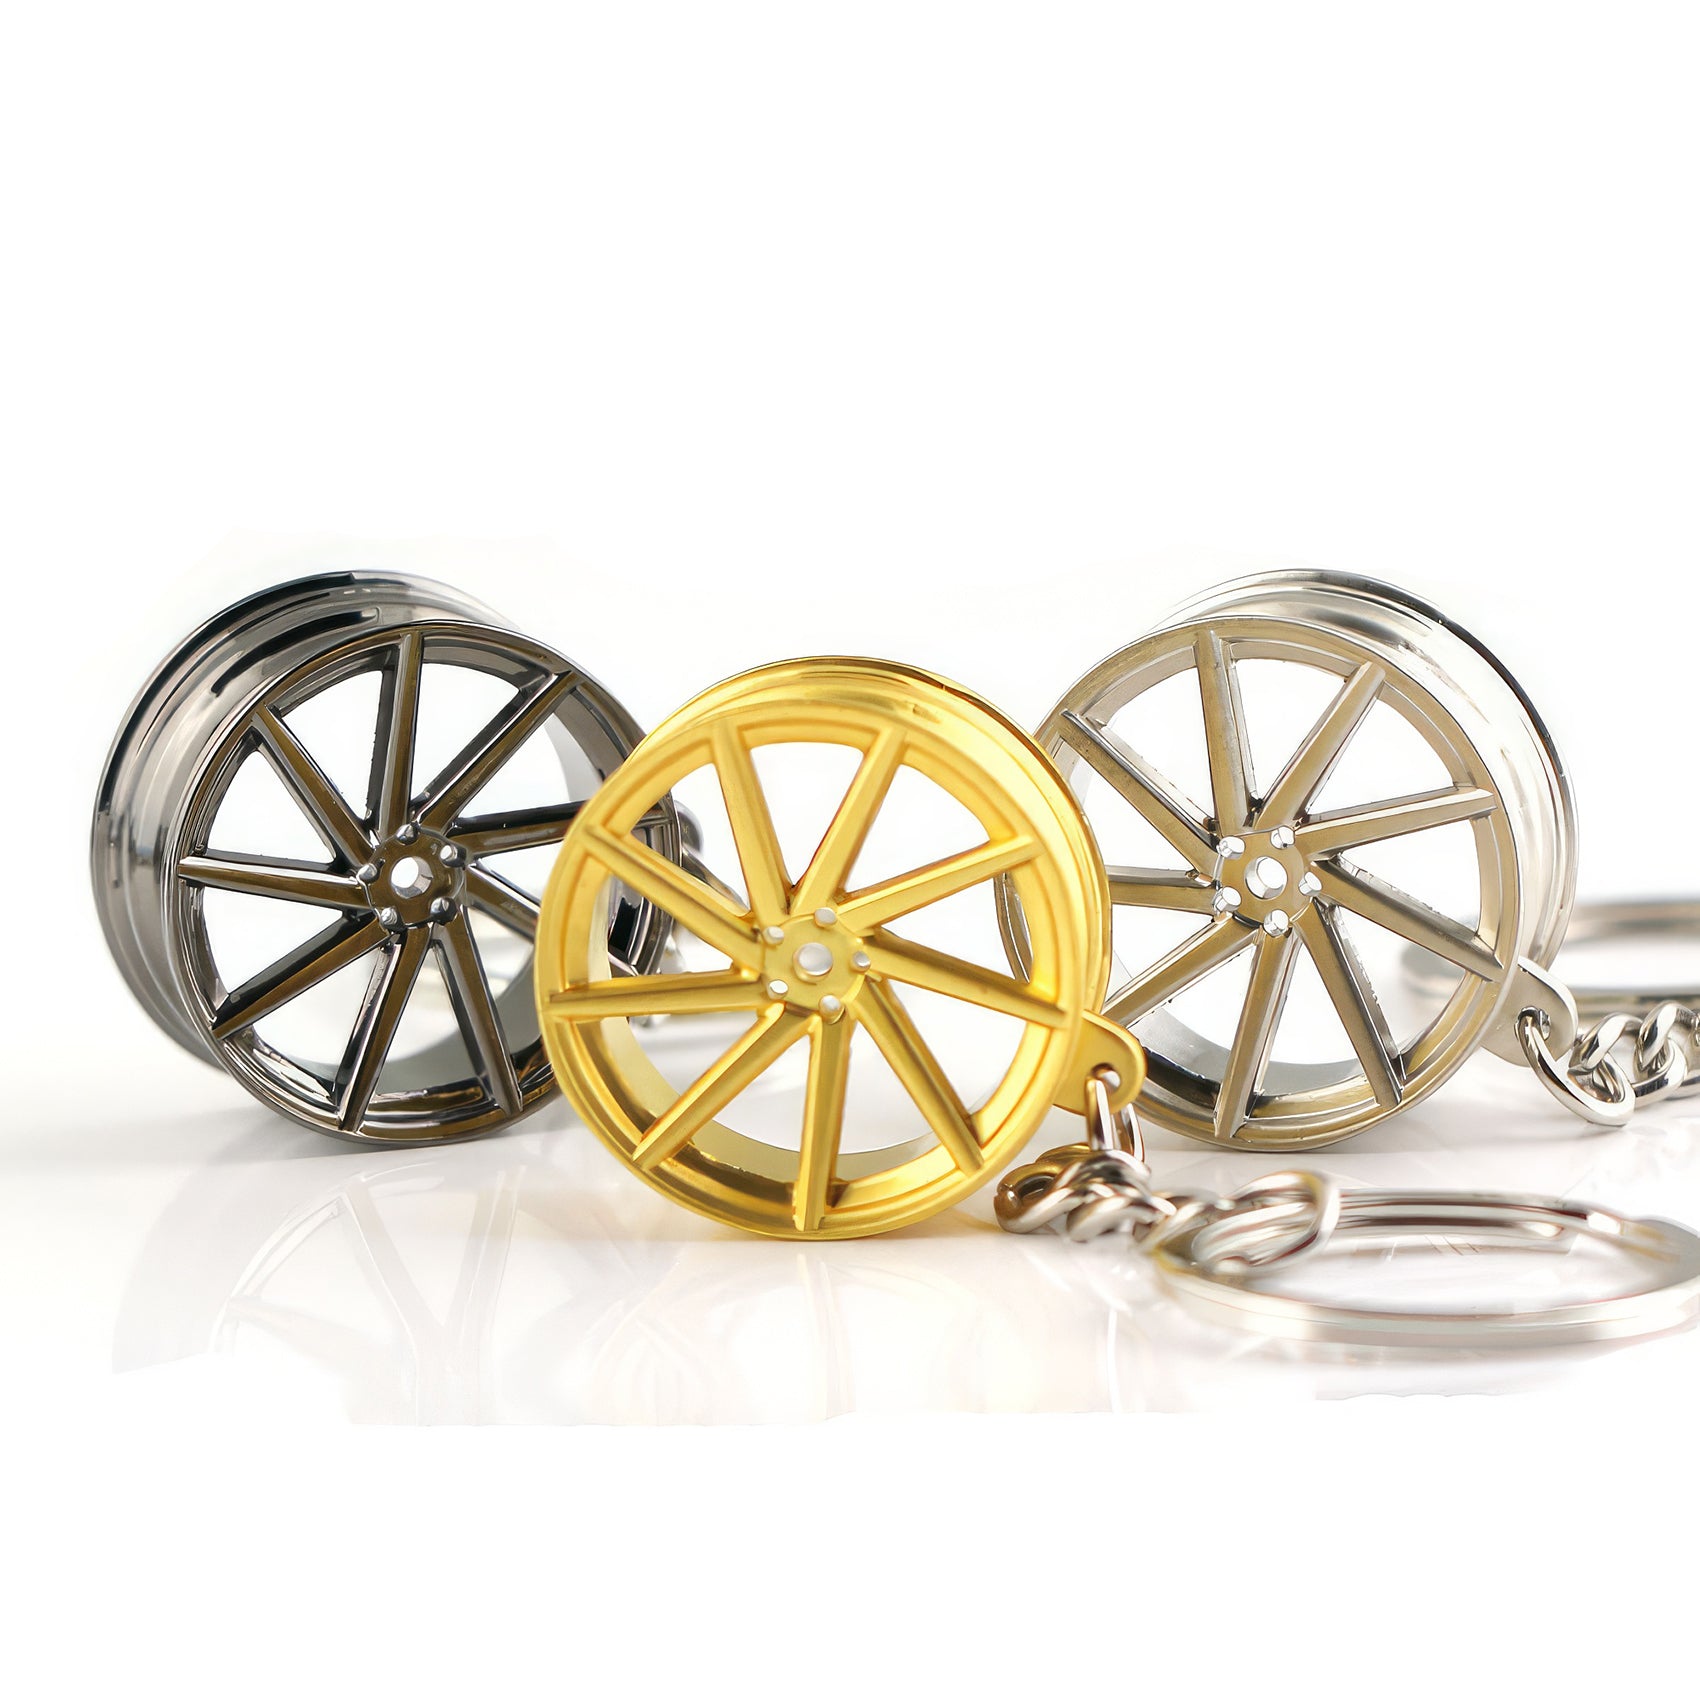 Vossen CVT Car Keychain in black, gold, and silver.